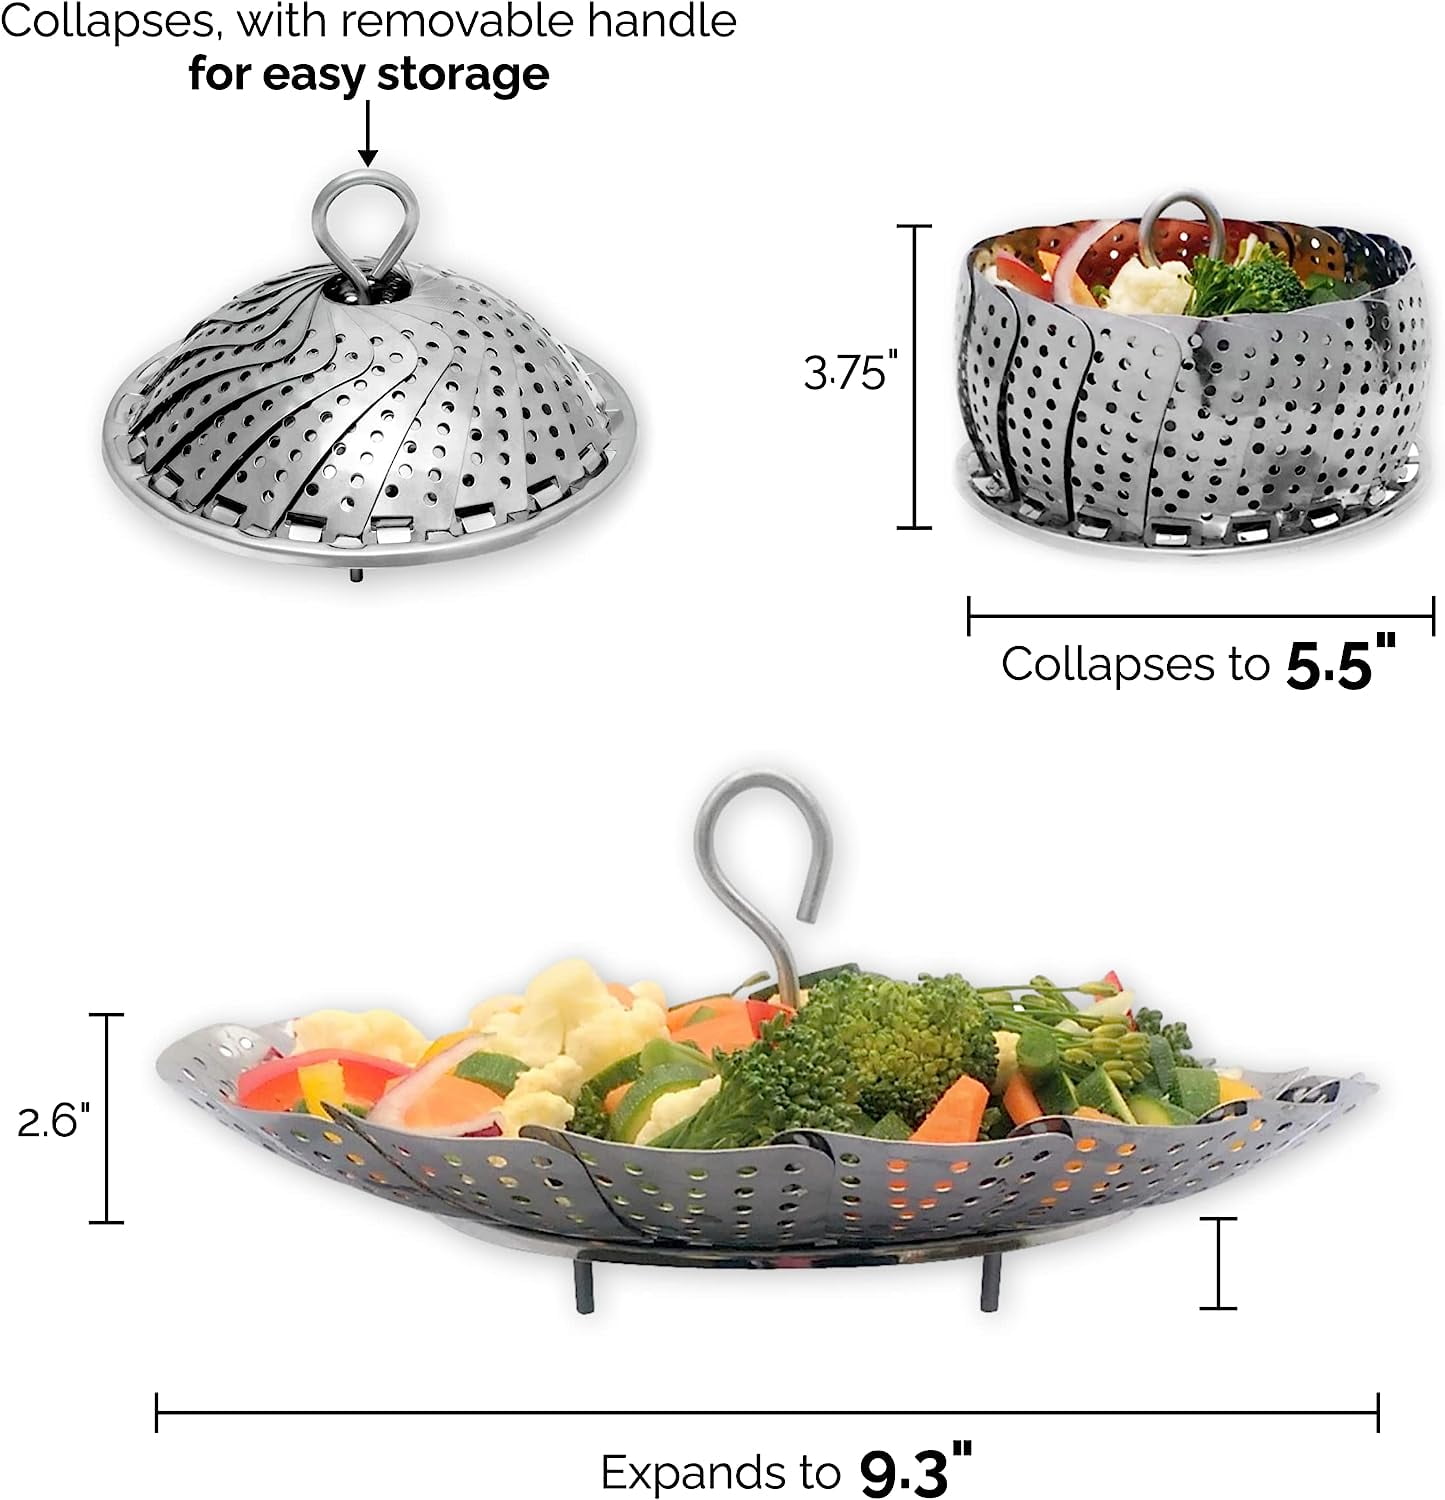 AOZITA Steamer Basket for Instant Pot Accessories 6 qt or 8 quart - 2 Tier  Stackable 18/8 Stainless Steel Mesh - Silicone Handle - Vegetable Steamer